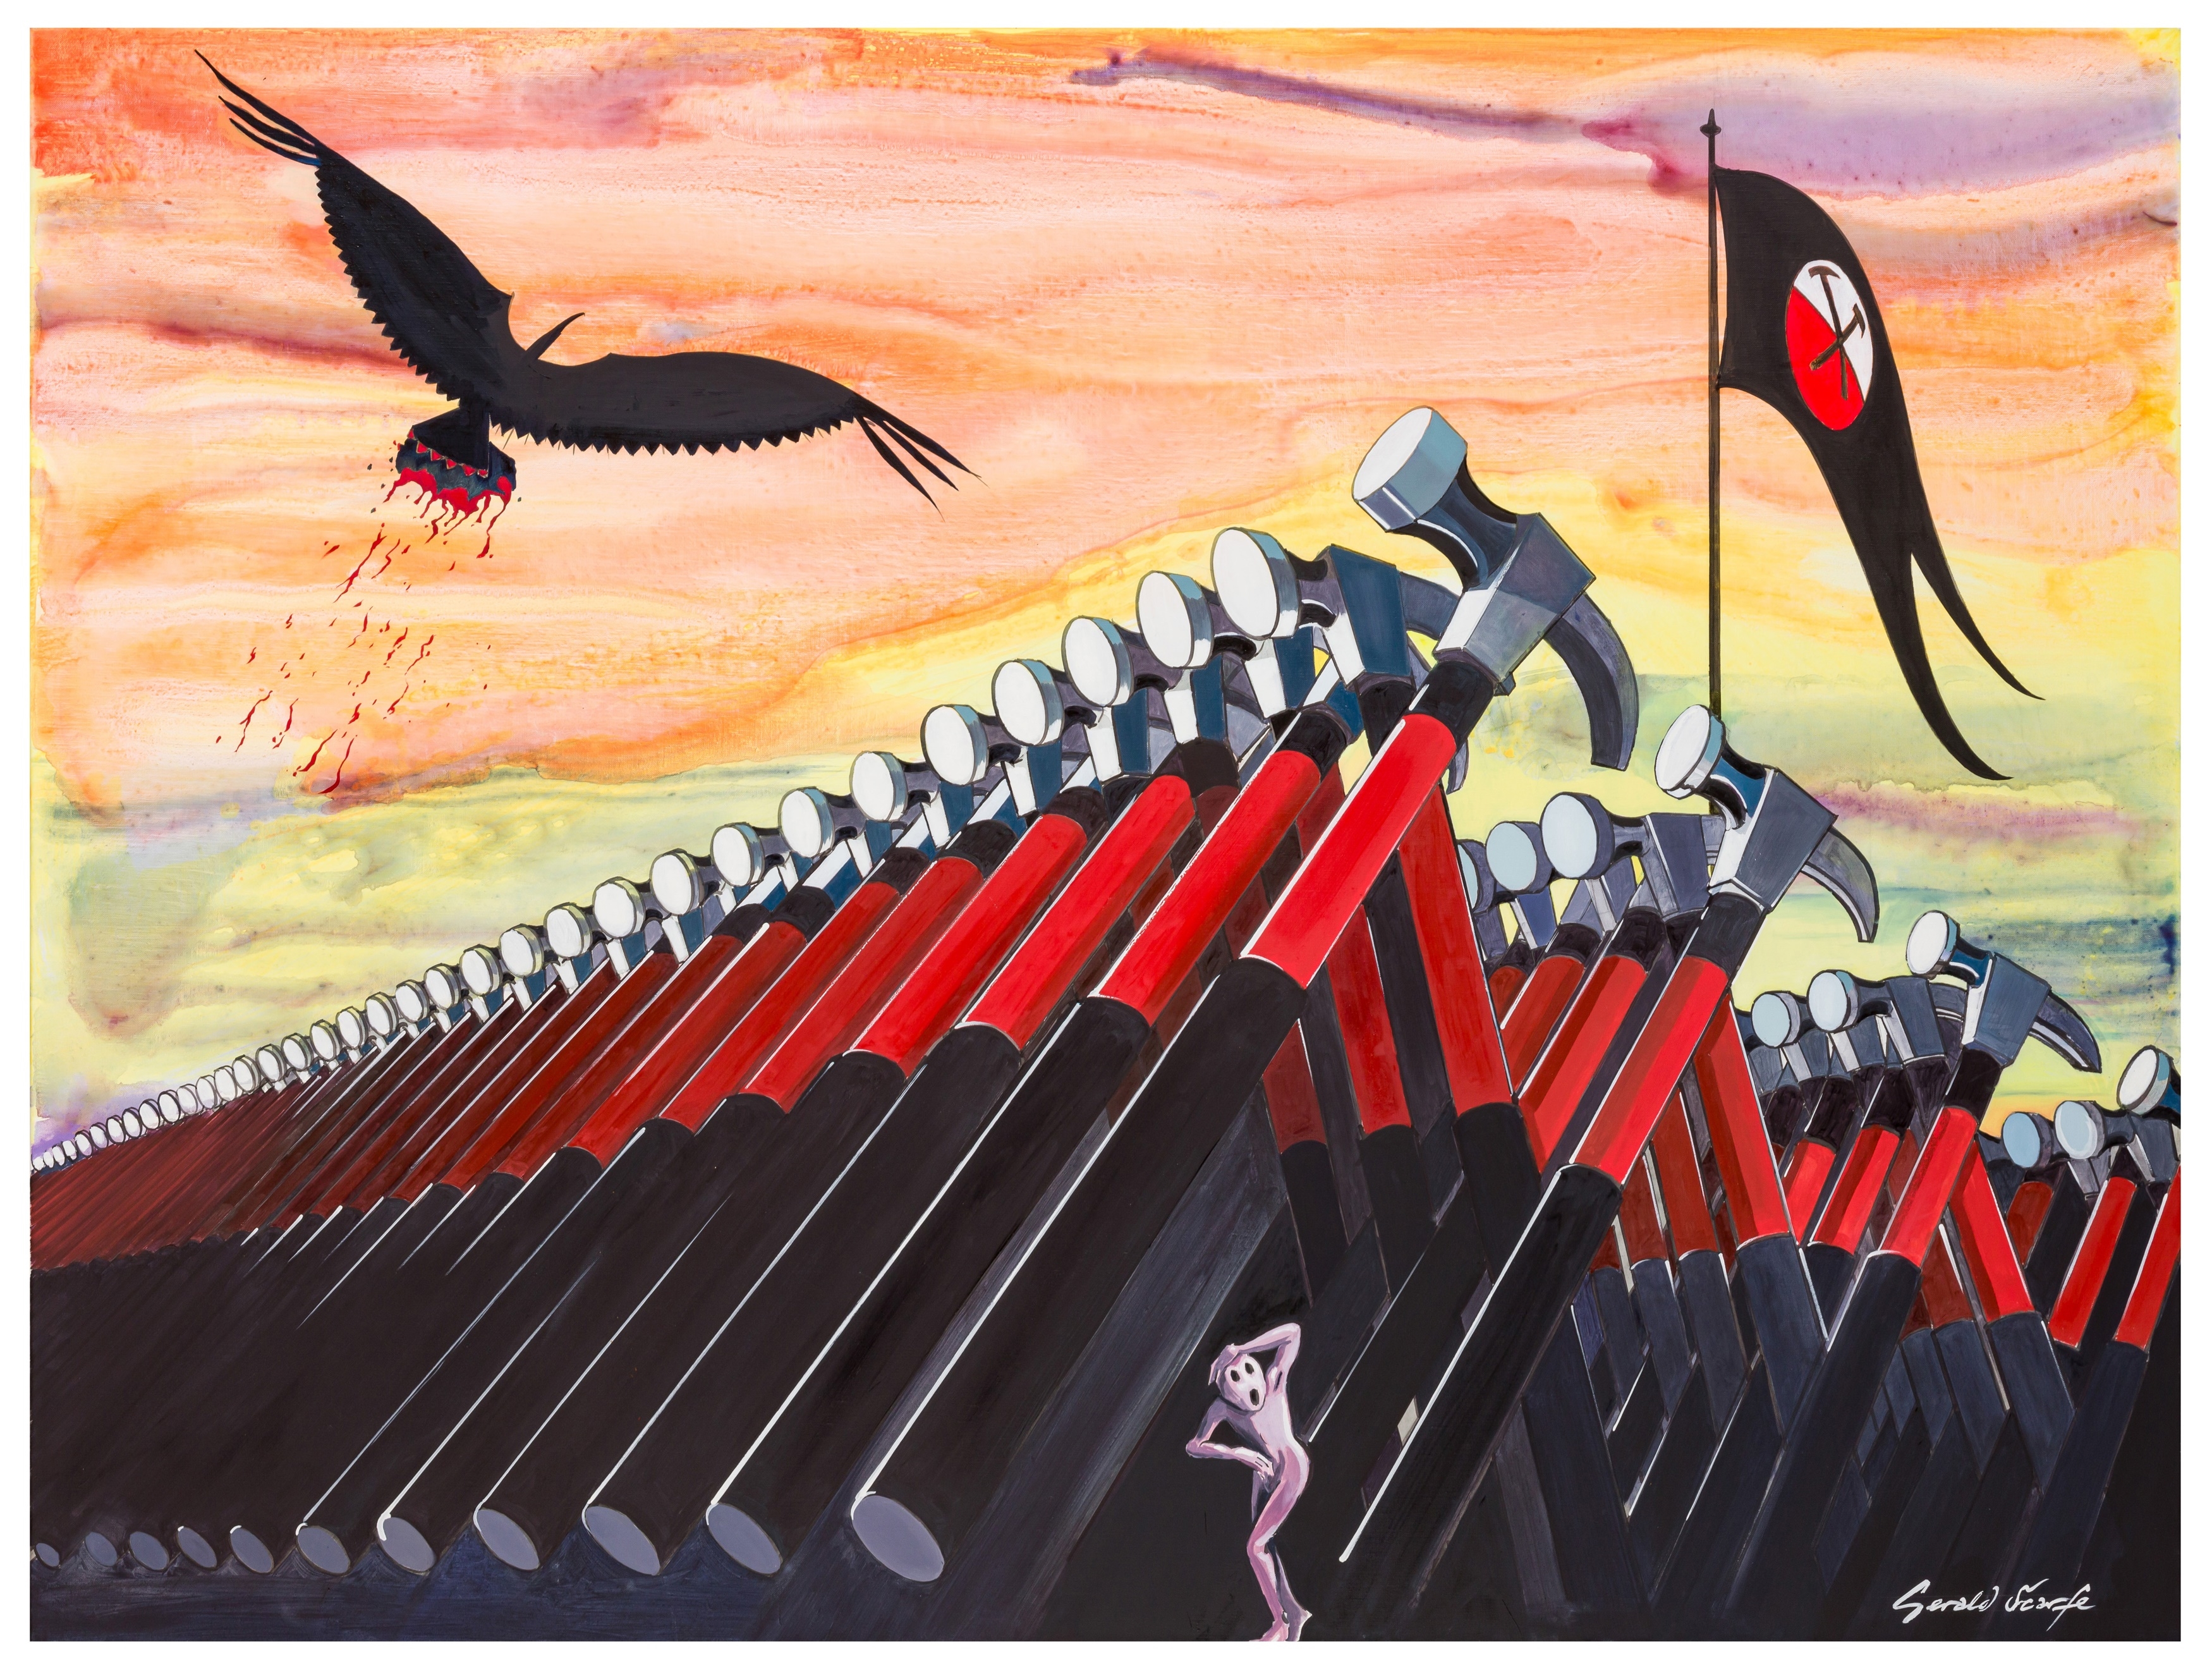 
Pink Floyd and Marching Hammers
signed 'Gerald Scarfe' (lower right)

 by Gerald Scarfe, October 2018